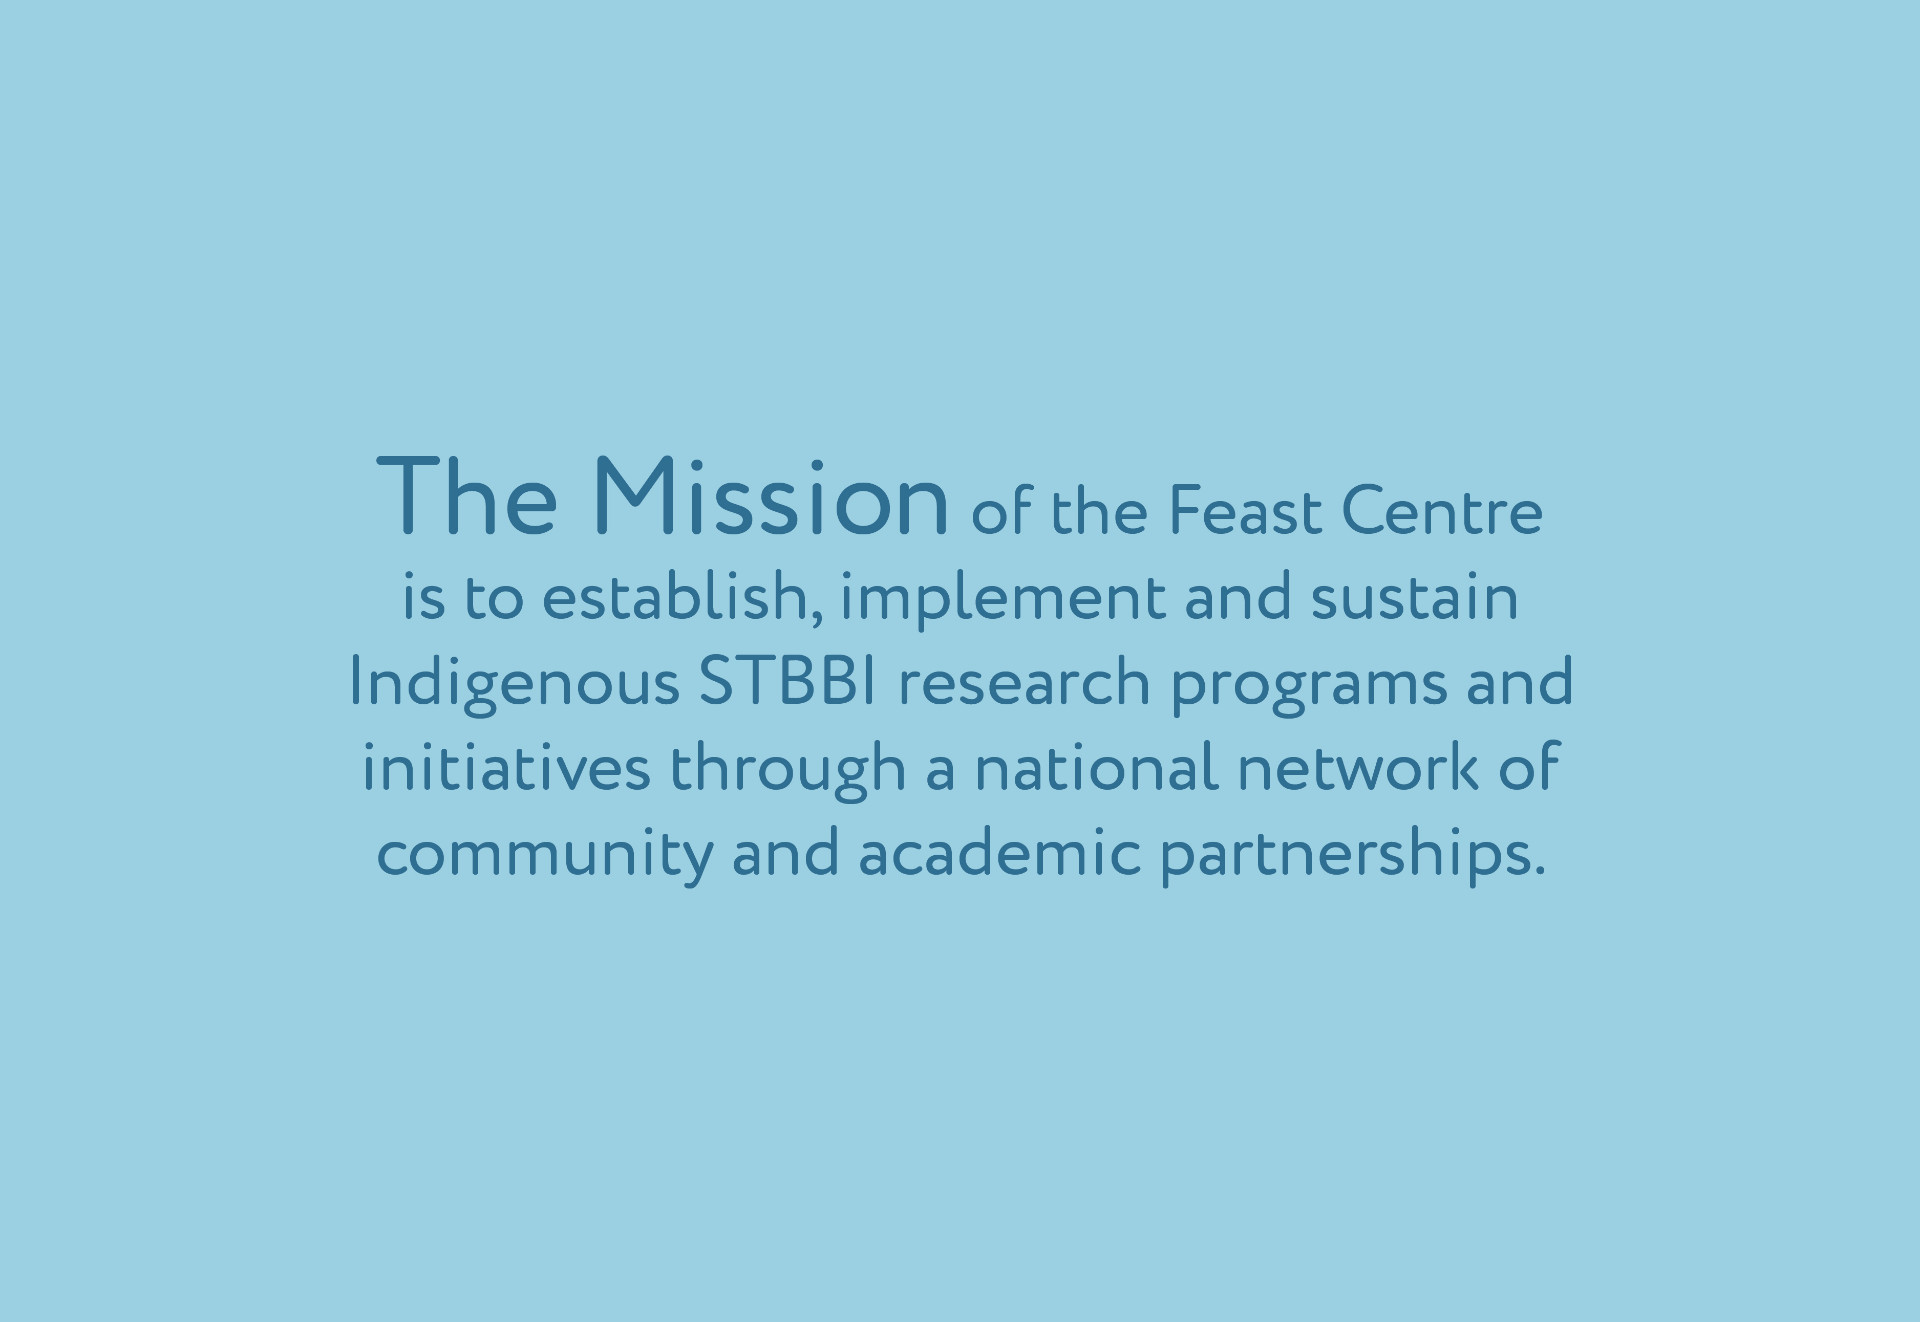 Our Mission The mission of the Feast Centre is to establish, implement, and sustain strategic research programs and initiatives, through a national network with strong academic and community partnerships. A strengths-based approach&#8212;emphasizing multi-generational Indigenous (First Nations, Inuit and M&#233;tis) knowledge will be engaged to balance research around three priority areas of reducing vulnerability, improving quality of life, and increasing determinants of health for those living with or affected by STBBI. In support of this mission, the Feast Centre will actively and meaningfully engage stakeholders and partners across all Centre activities.